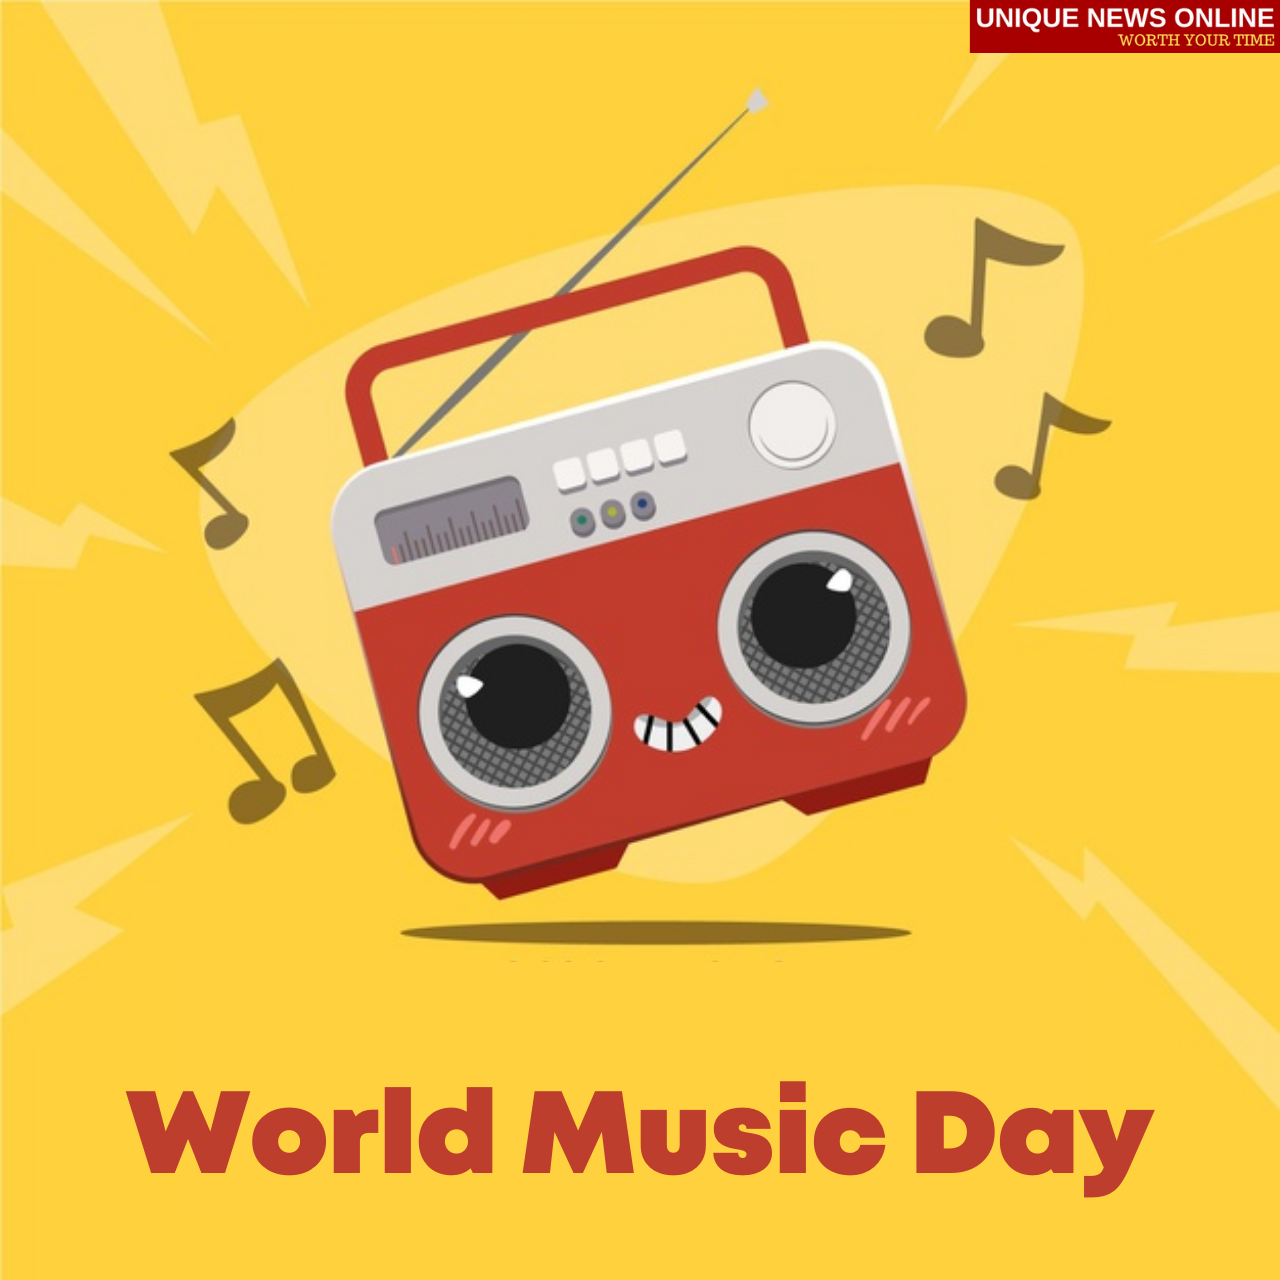 World Music Day 2021 Quotes, Images, Wishes, Poster, Status, Messages, and Greetings to celebrate this day with your Loved Ones